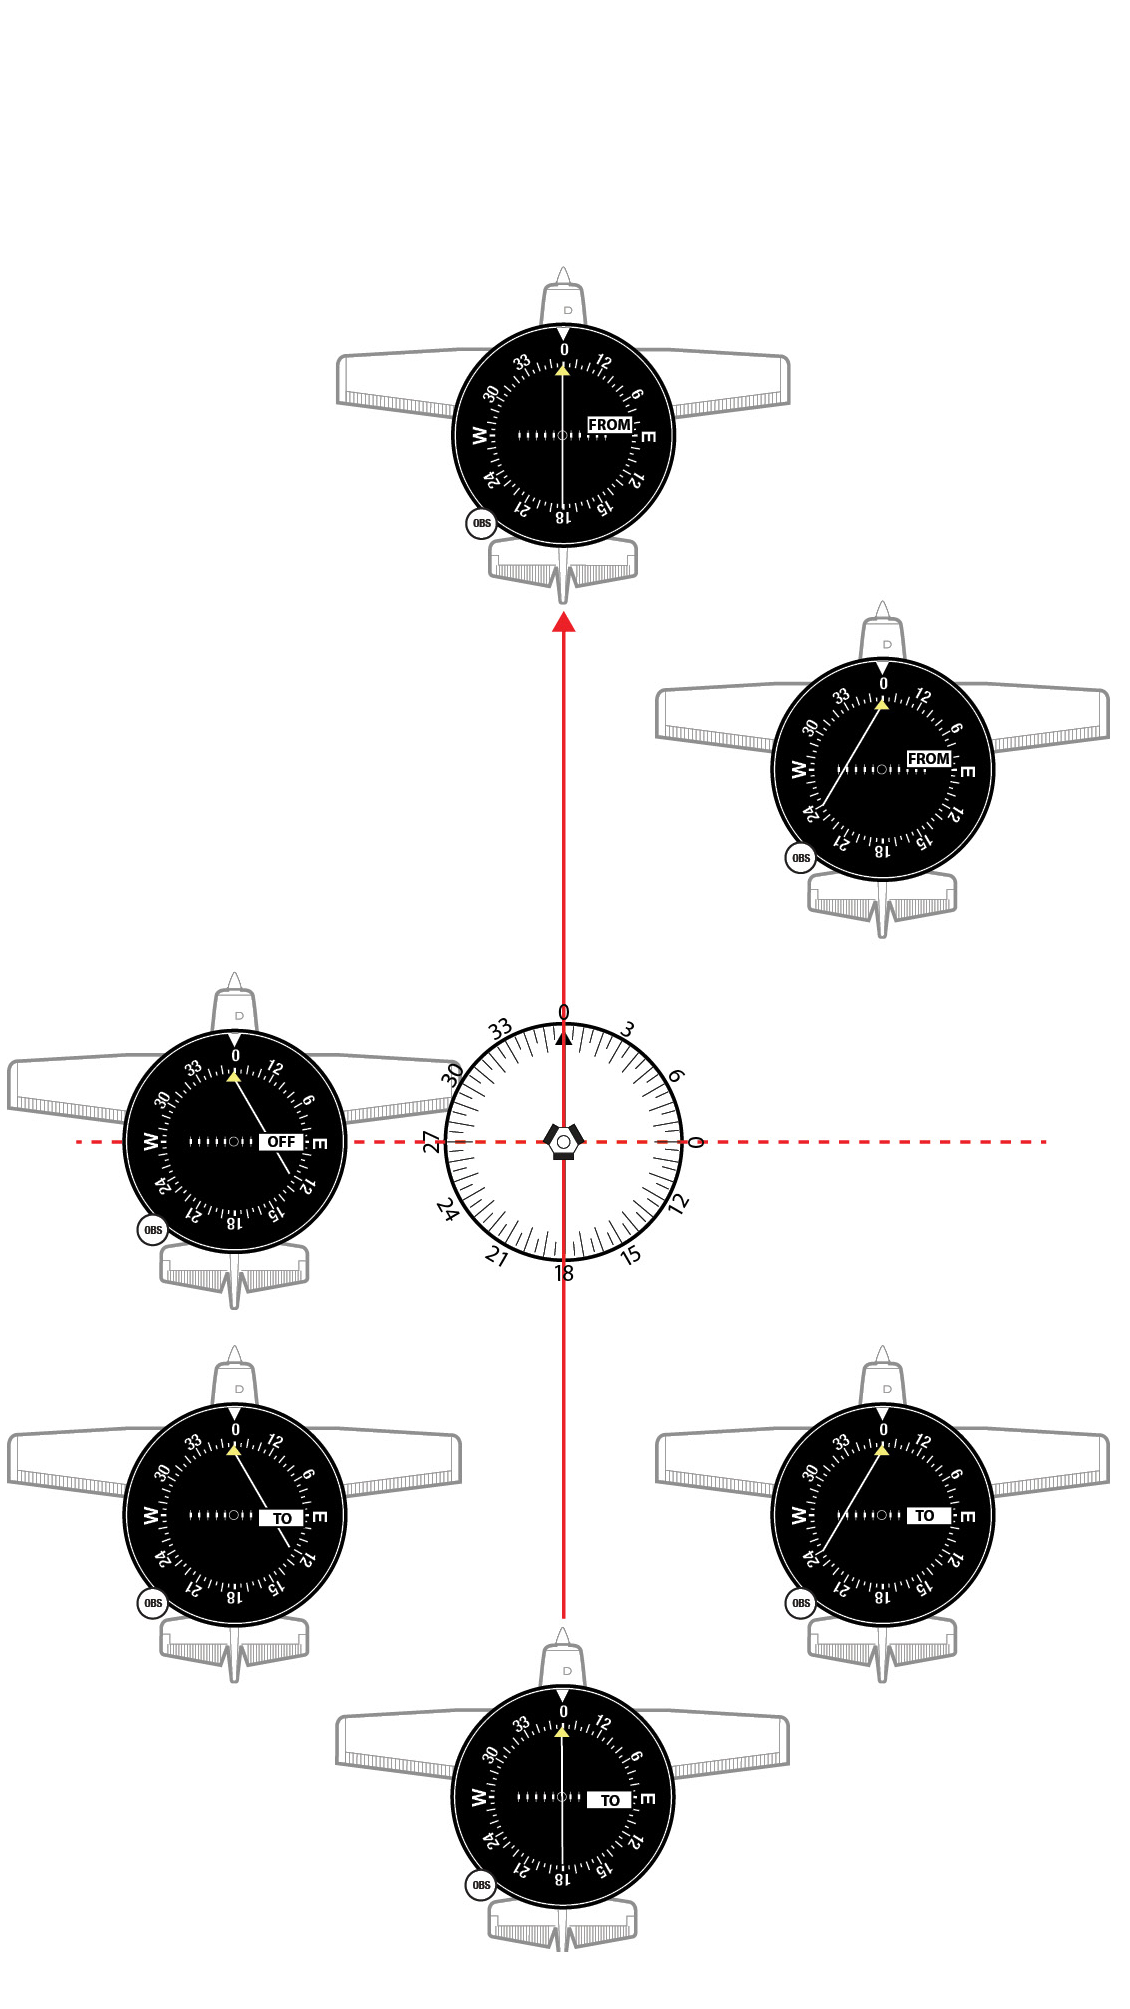 A course deviation indicator needle shows how far off course an aircraft is from a selected radial. Each dot represents two degrees. A full deflection represents 12 degrees or more off course. When flying toward the station and tracking a radial on the opposite side, the TO flag will show. (The aircraft at bottom is on the 180 radial tracking the 360 radial.) Tracking away from the station will show a FROM flag. The flag is unreliable when over or near the station.